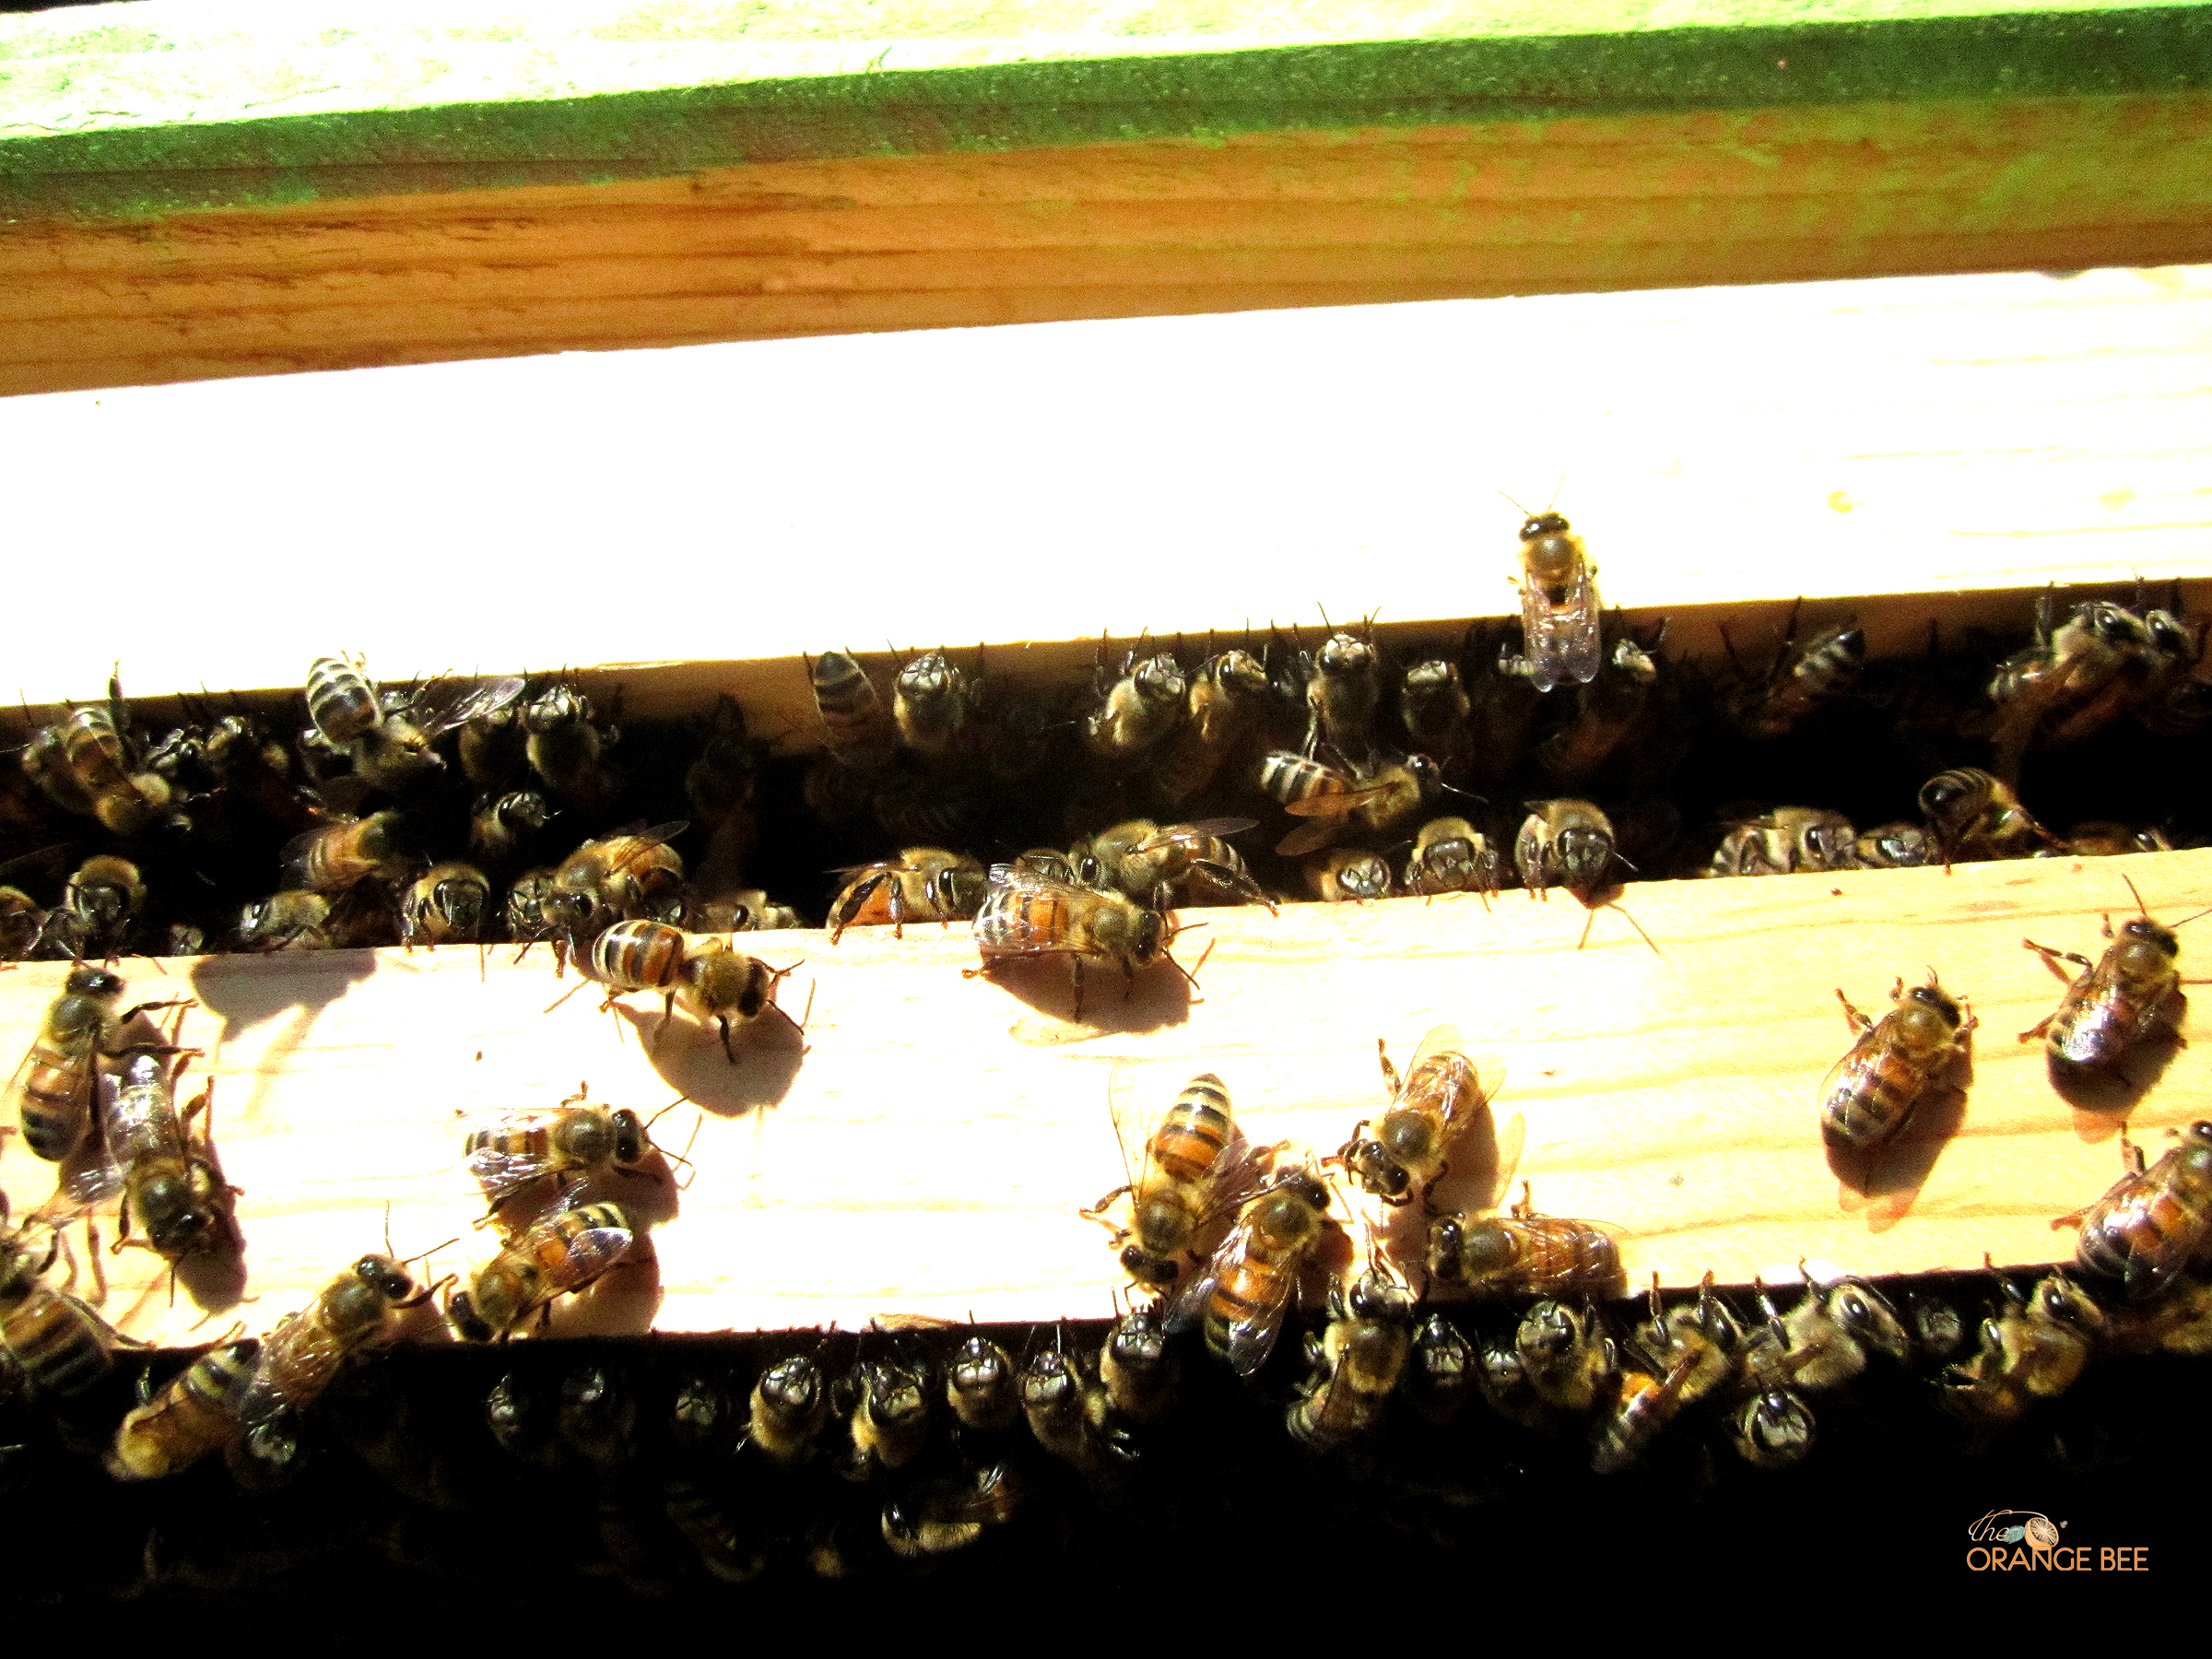 Guard bees - watching the bee hive for intruders.